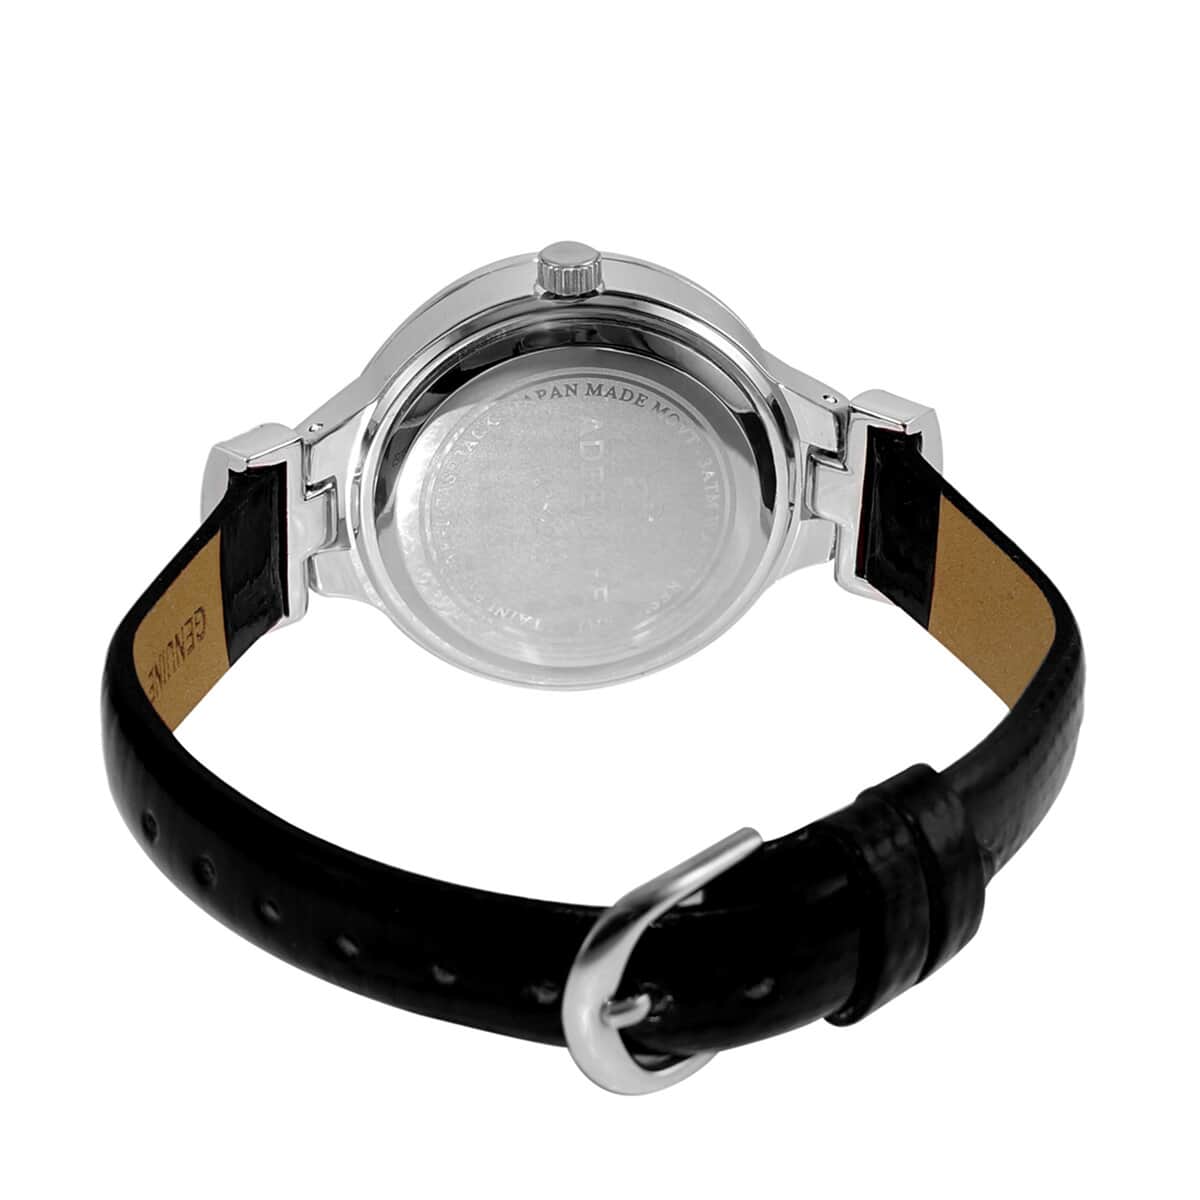 ADEE KAYE Austrian Crystal Japanese Movement Watch in Silvertone and Black Leather Strap (33 mm) image number 2